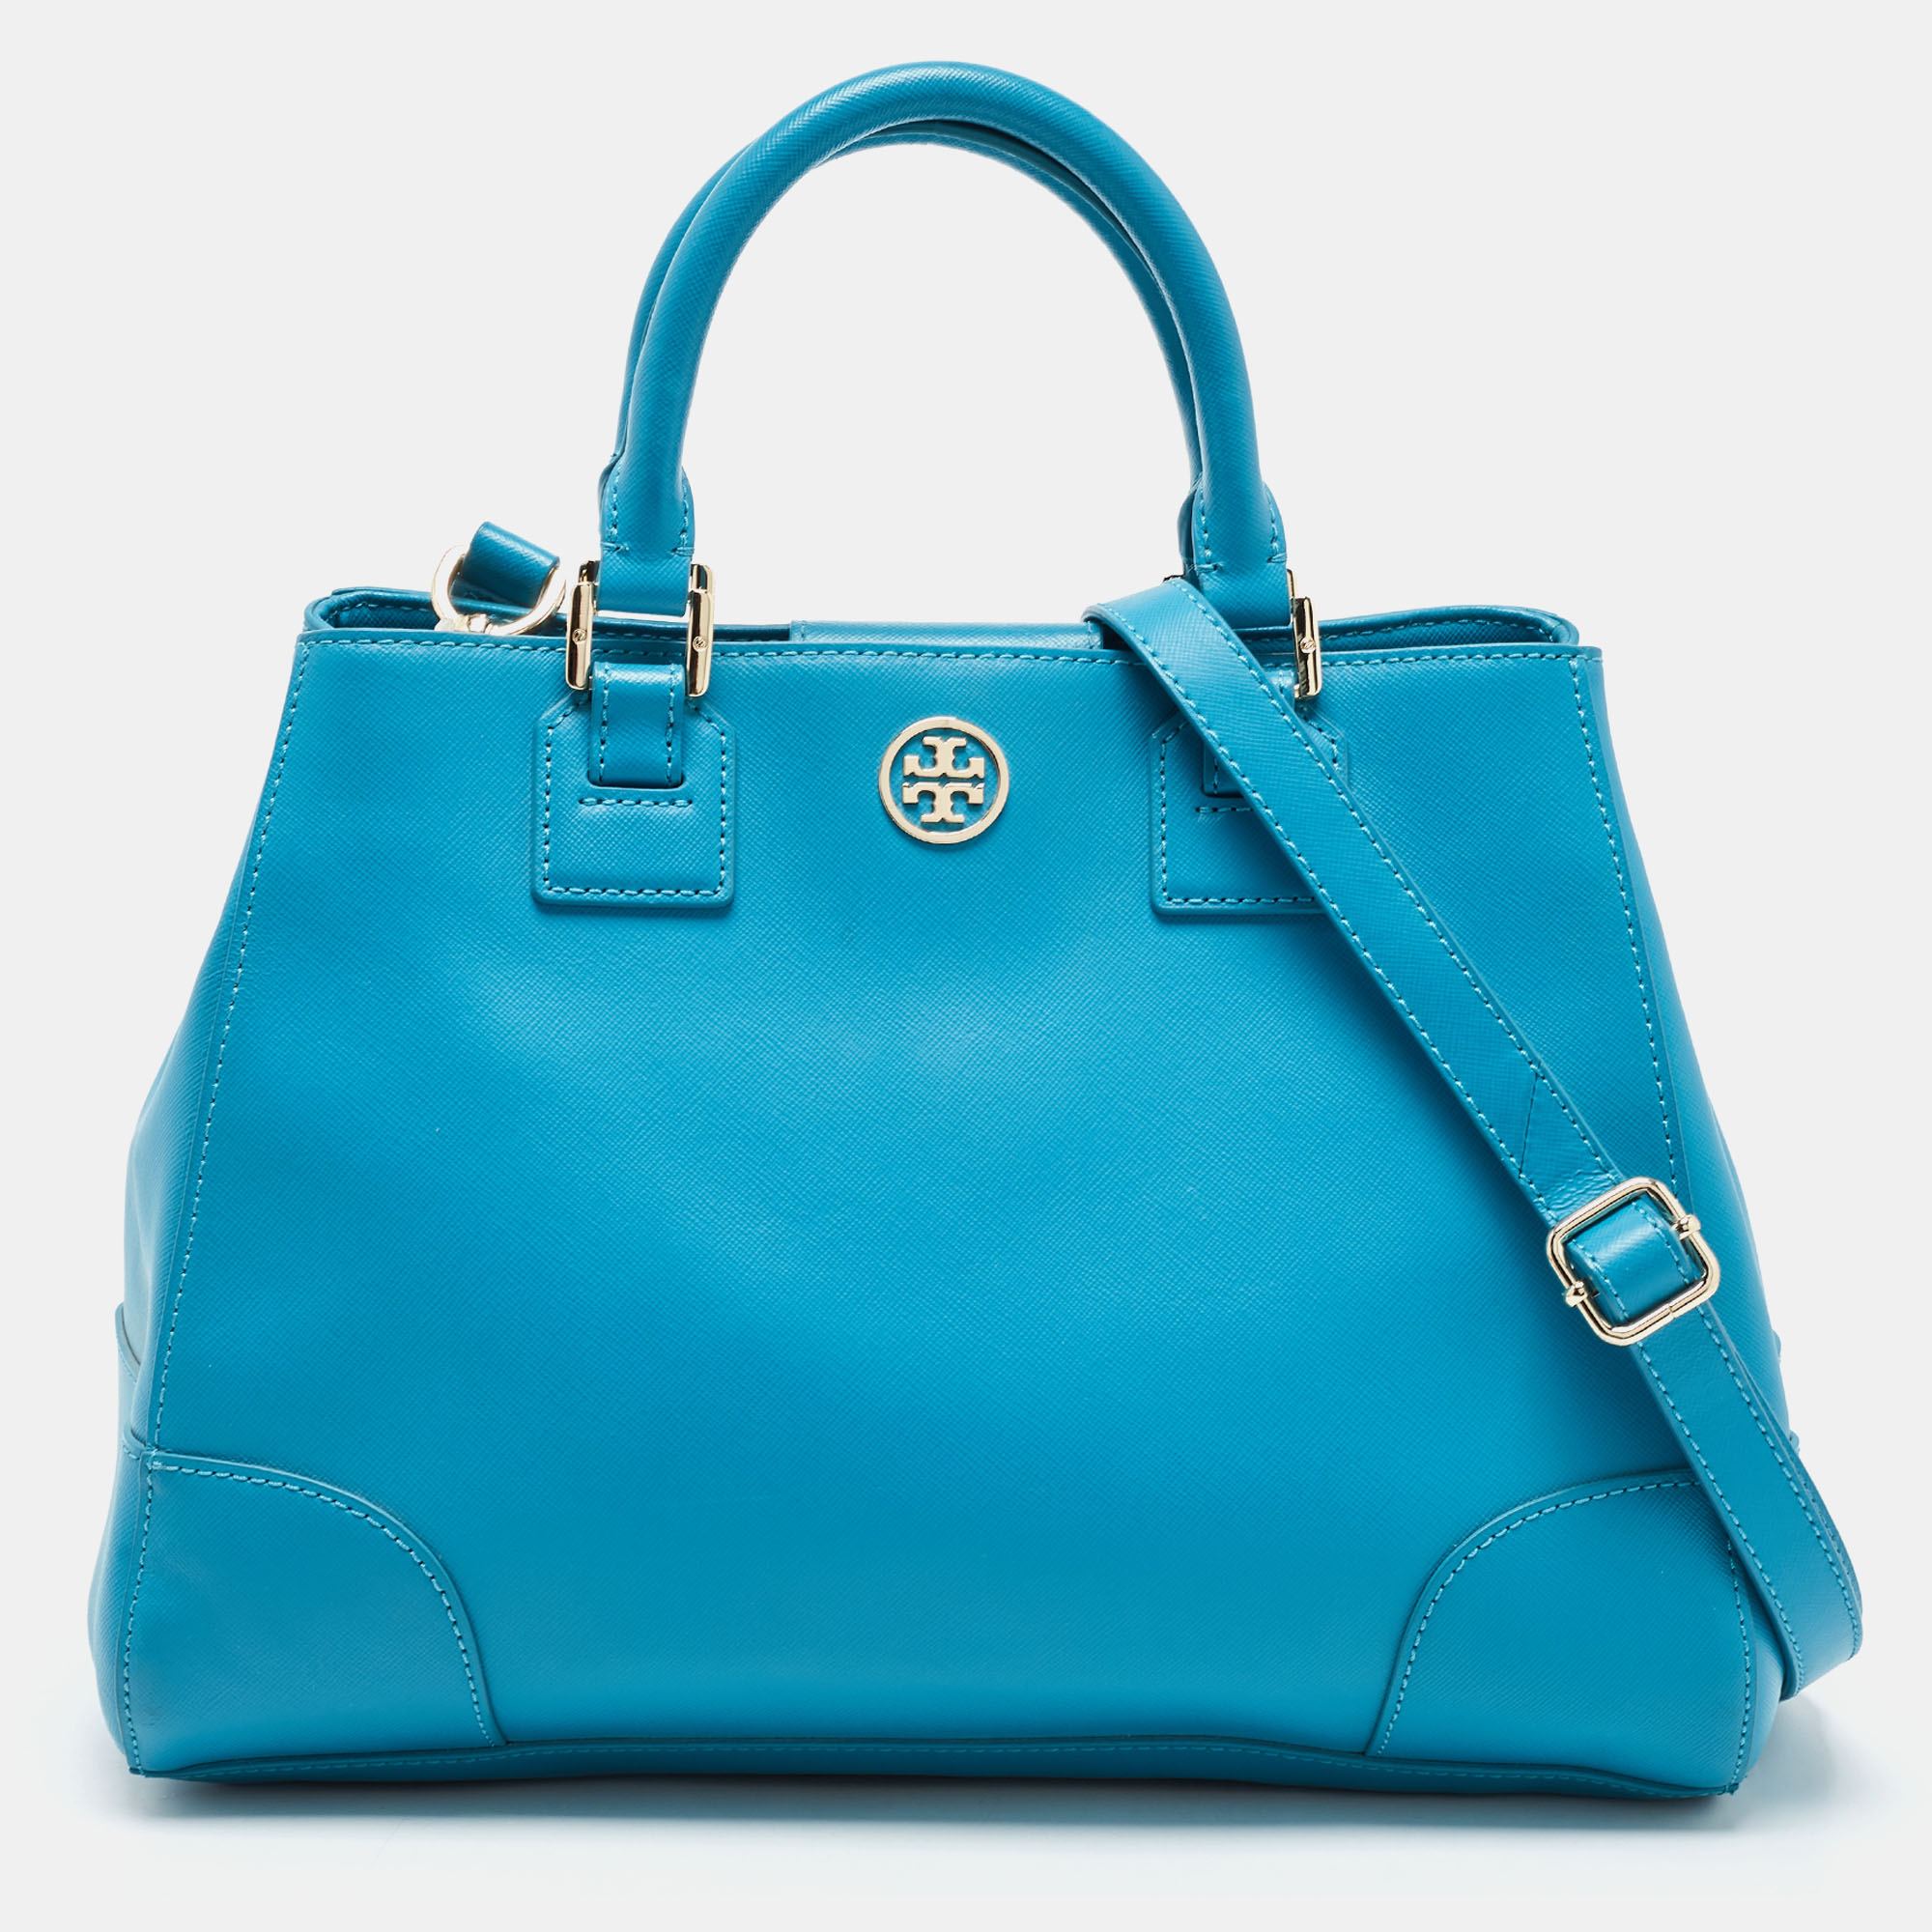 Pre-owned Tory Burch Women's Tote Bags